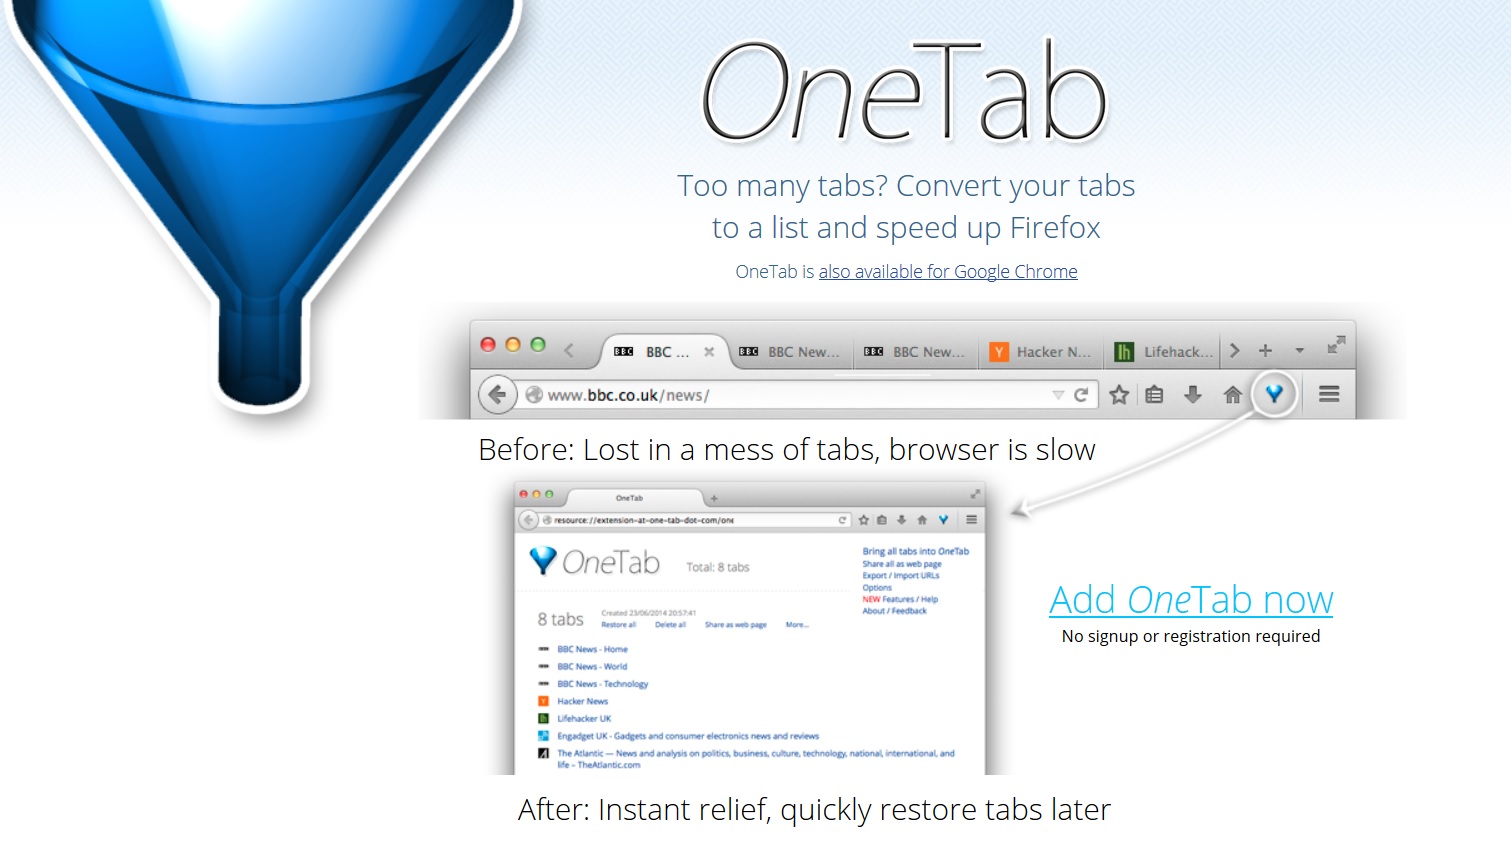 OneTab instantly frees up to 95 percent of memory in Google Chrome